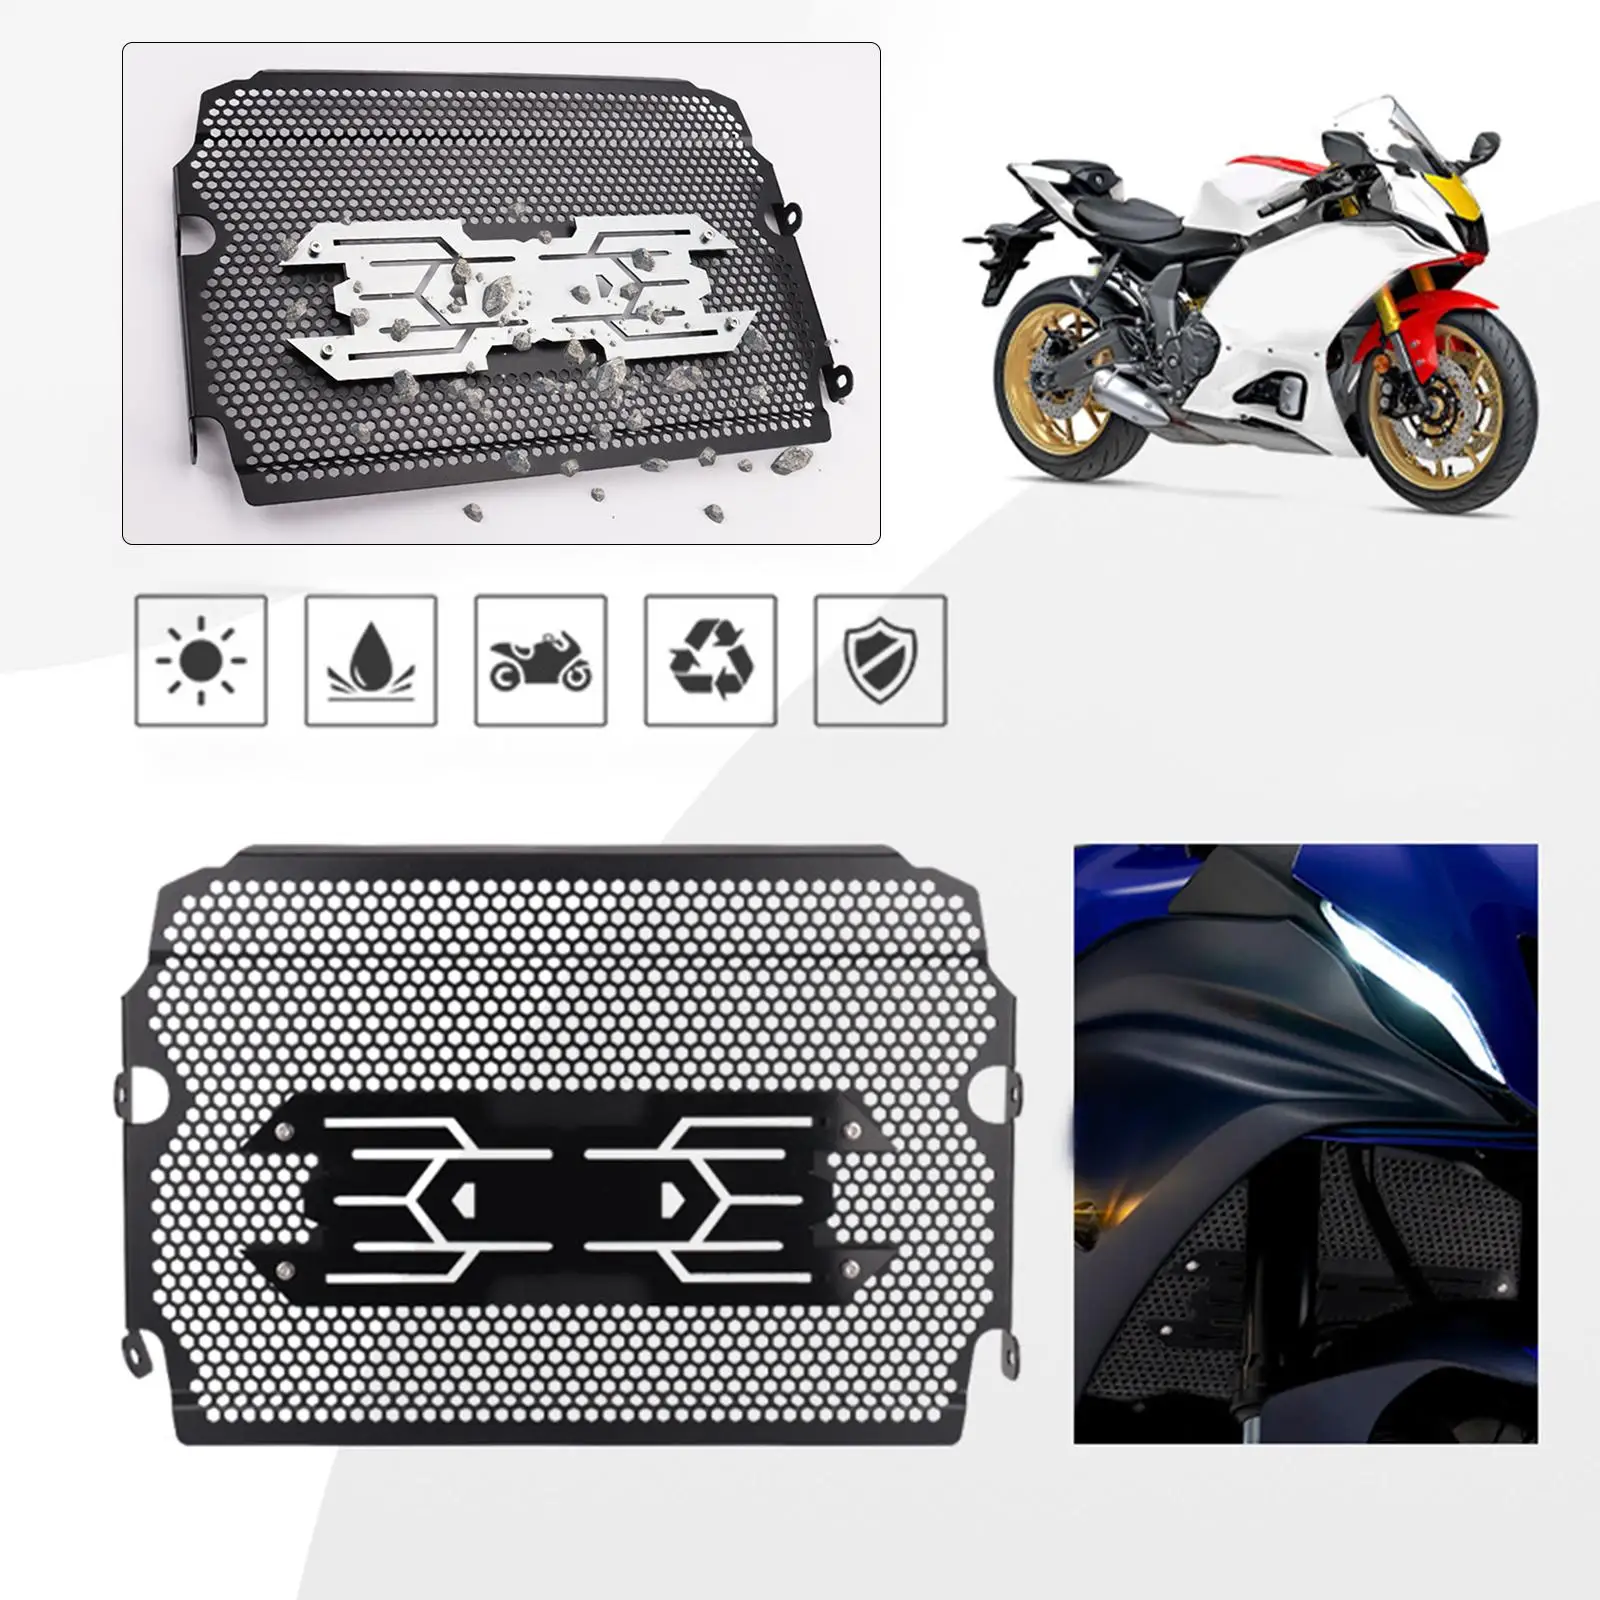 Motorcycle Radiator Grille Guard Mesh Protective Cover Water Tank Shield Cover